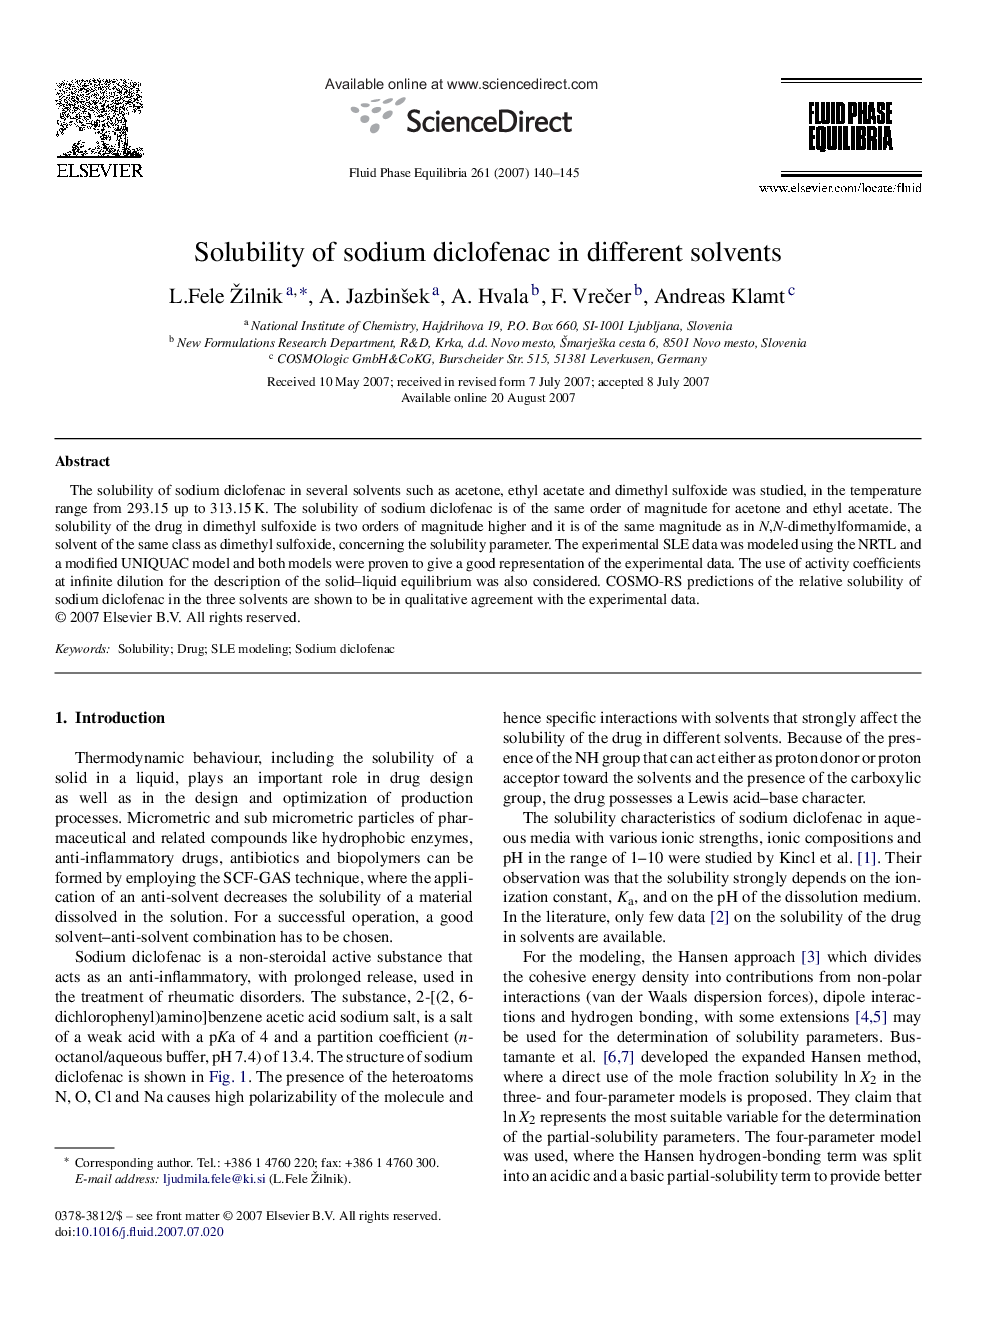 Solubility of sodium diclofenac in different solvents